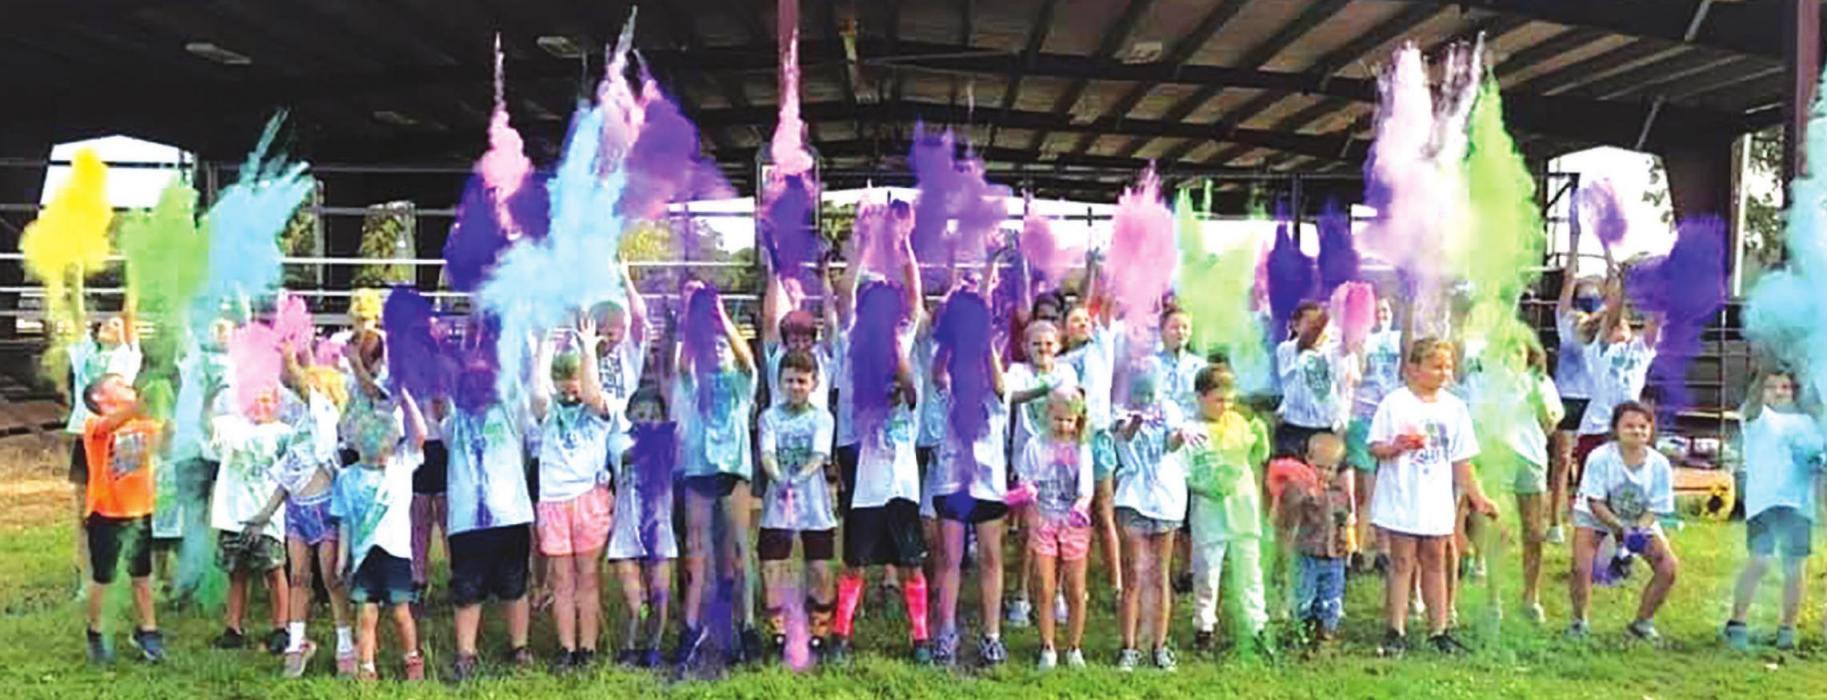 Fayette County 4-H Color Run Held